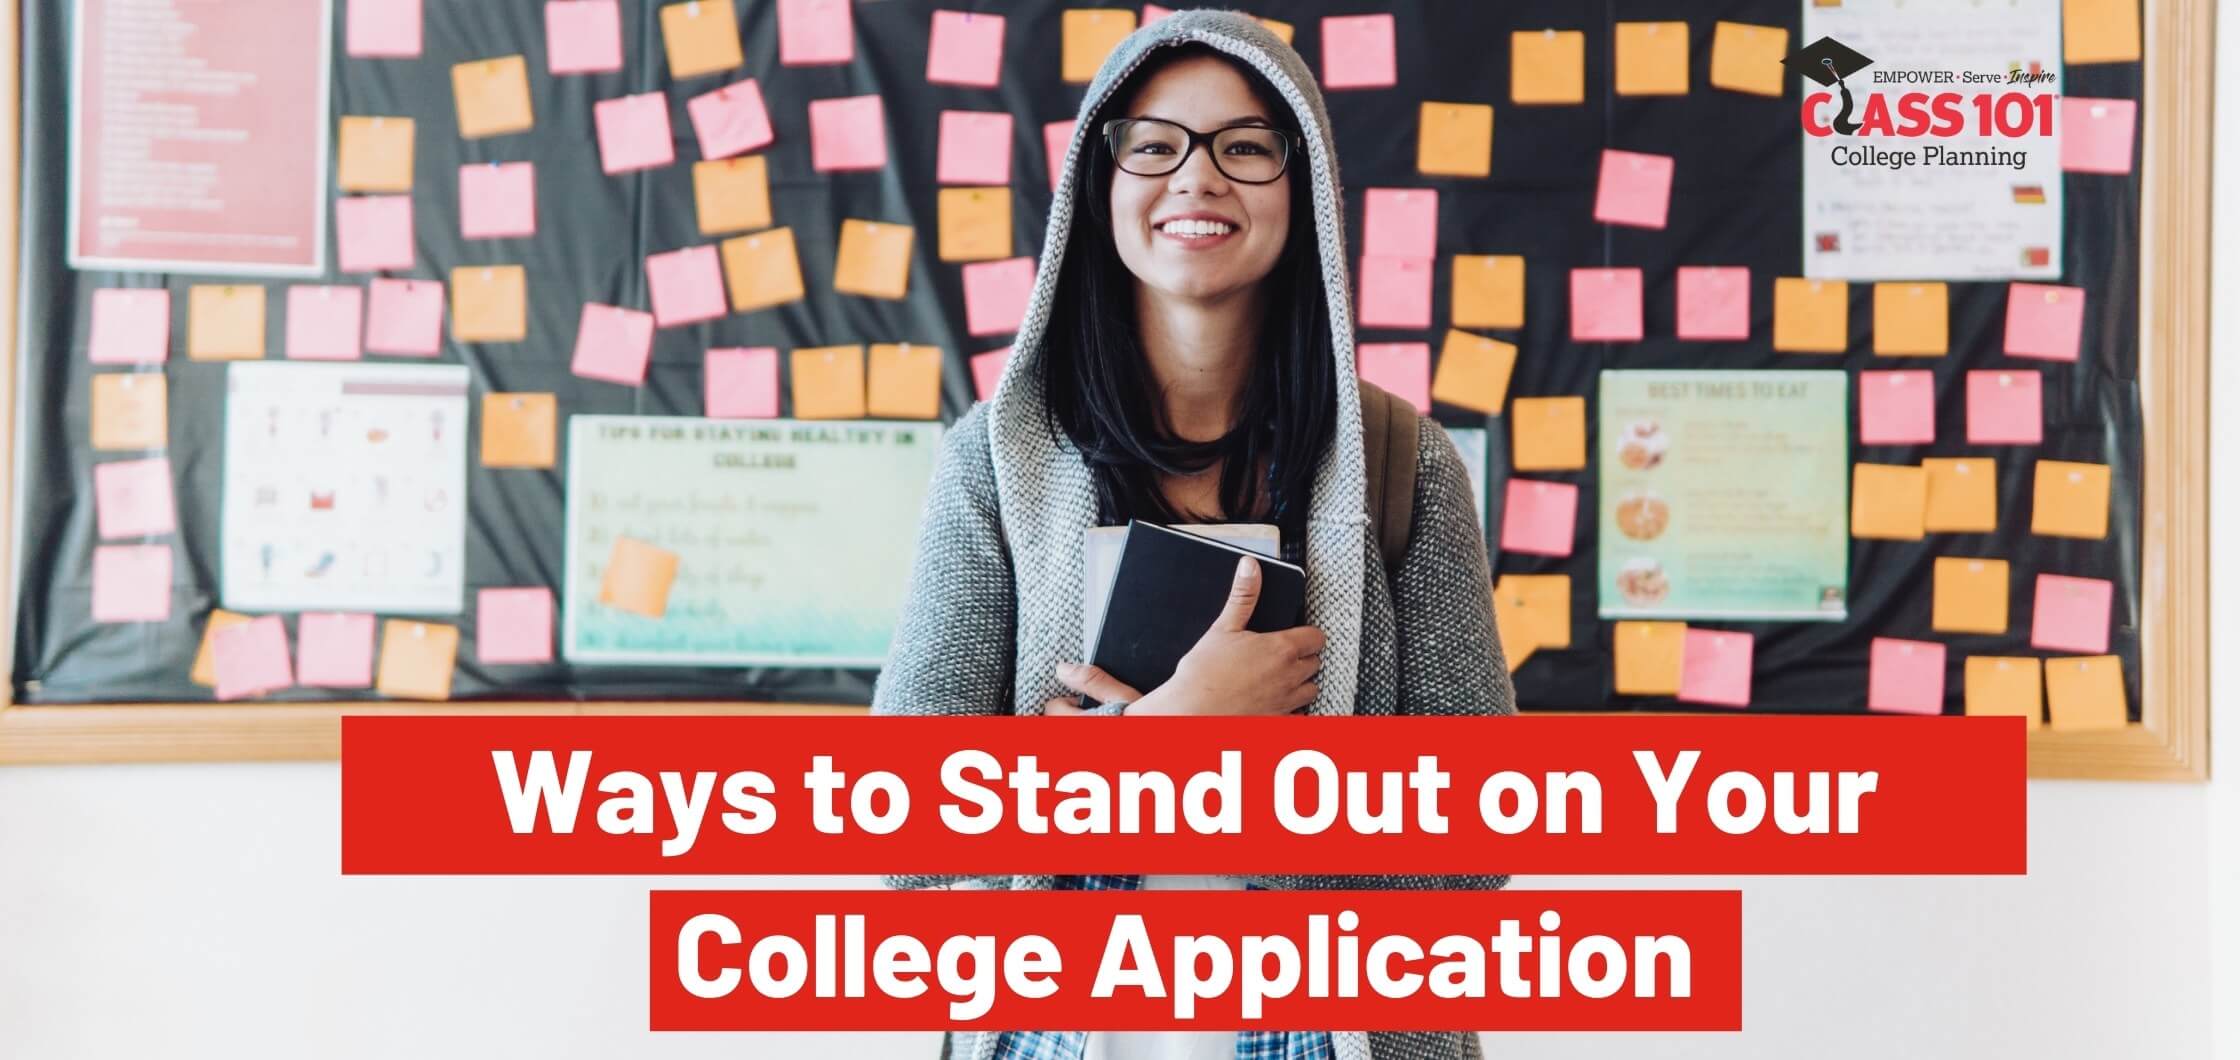 How to Stand Out on a College Application